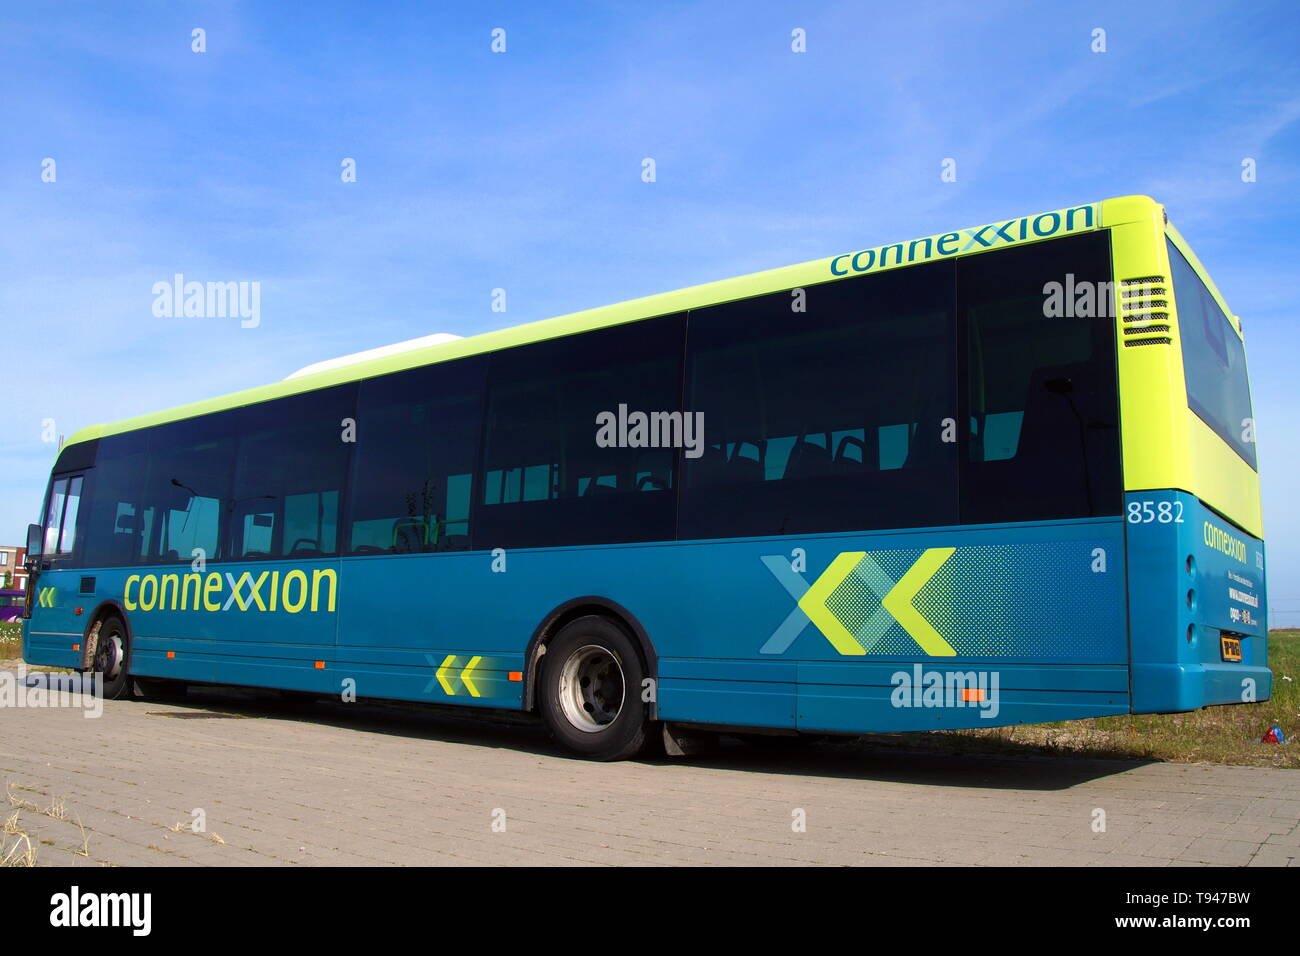 Almere Poort, Flevoland, The Netherlands - May 23, 2015: Connexxion bus standing at rest. Stock Photo